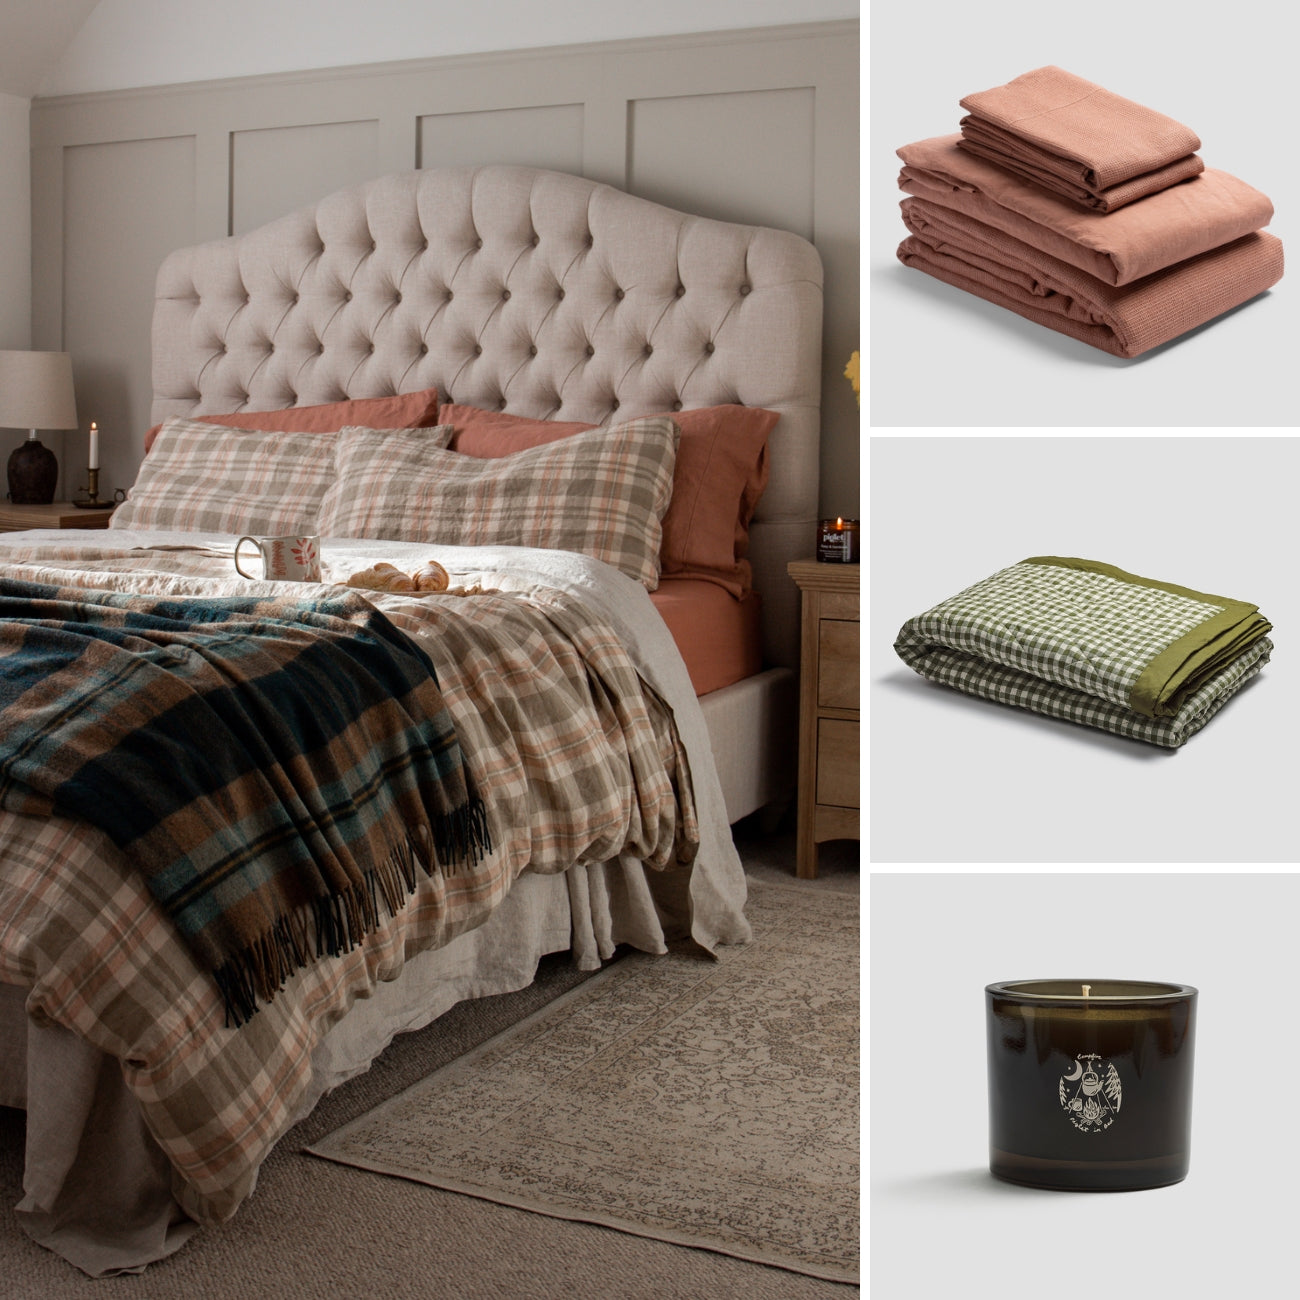 Taupe linen bedding, gingham quilt and candle